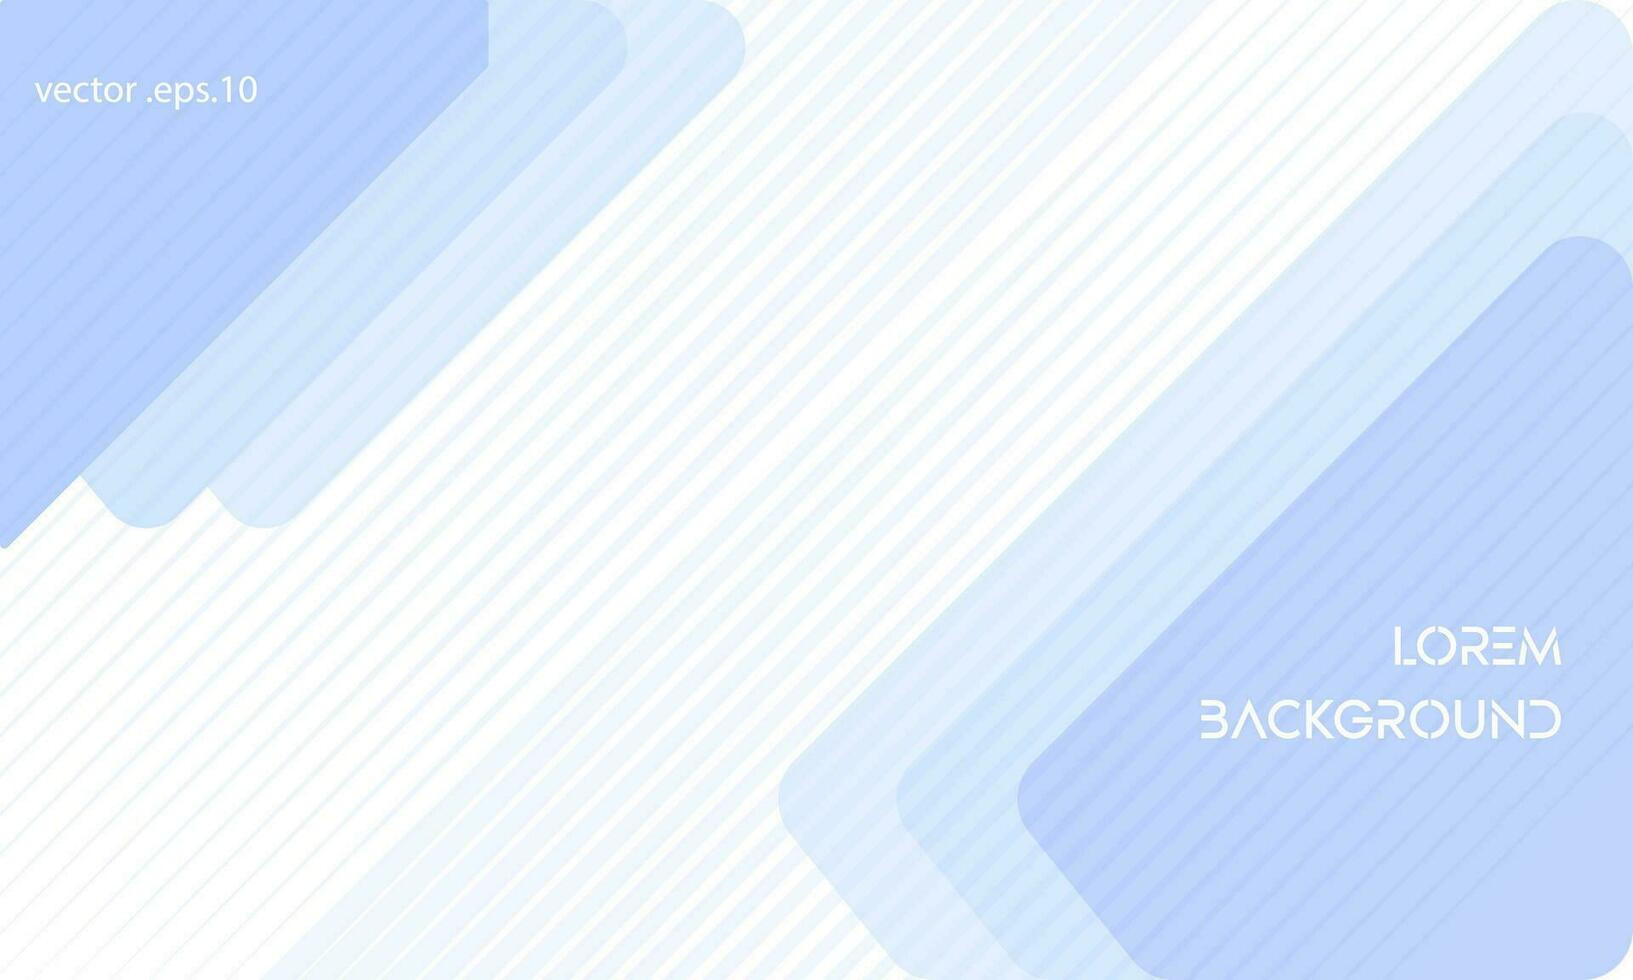 Abstract background with blue and white stripes. Vector illustration for your design.